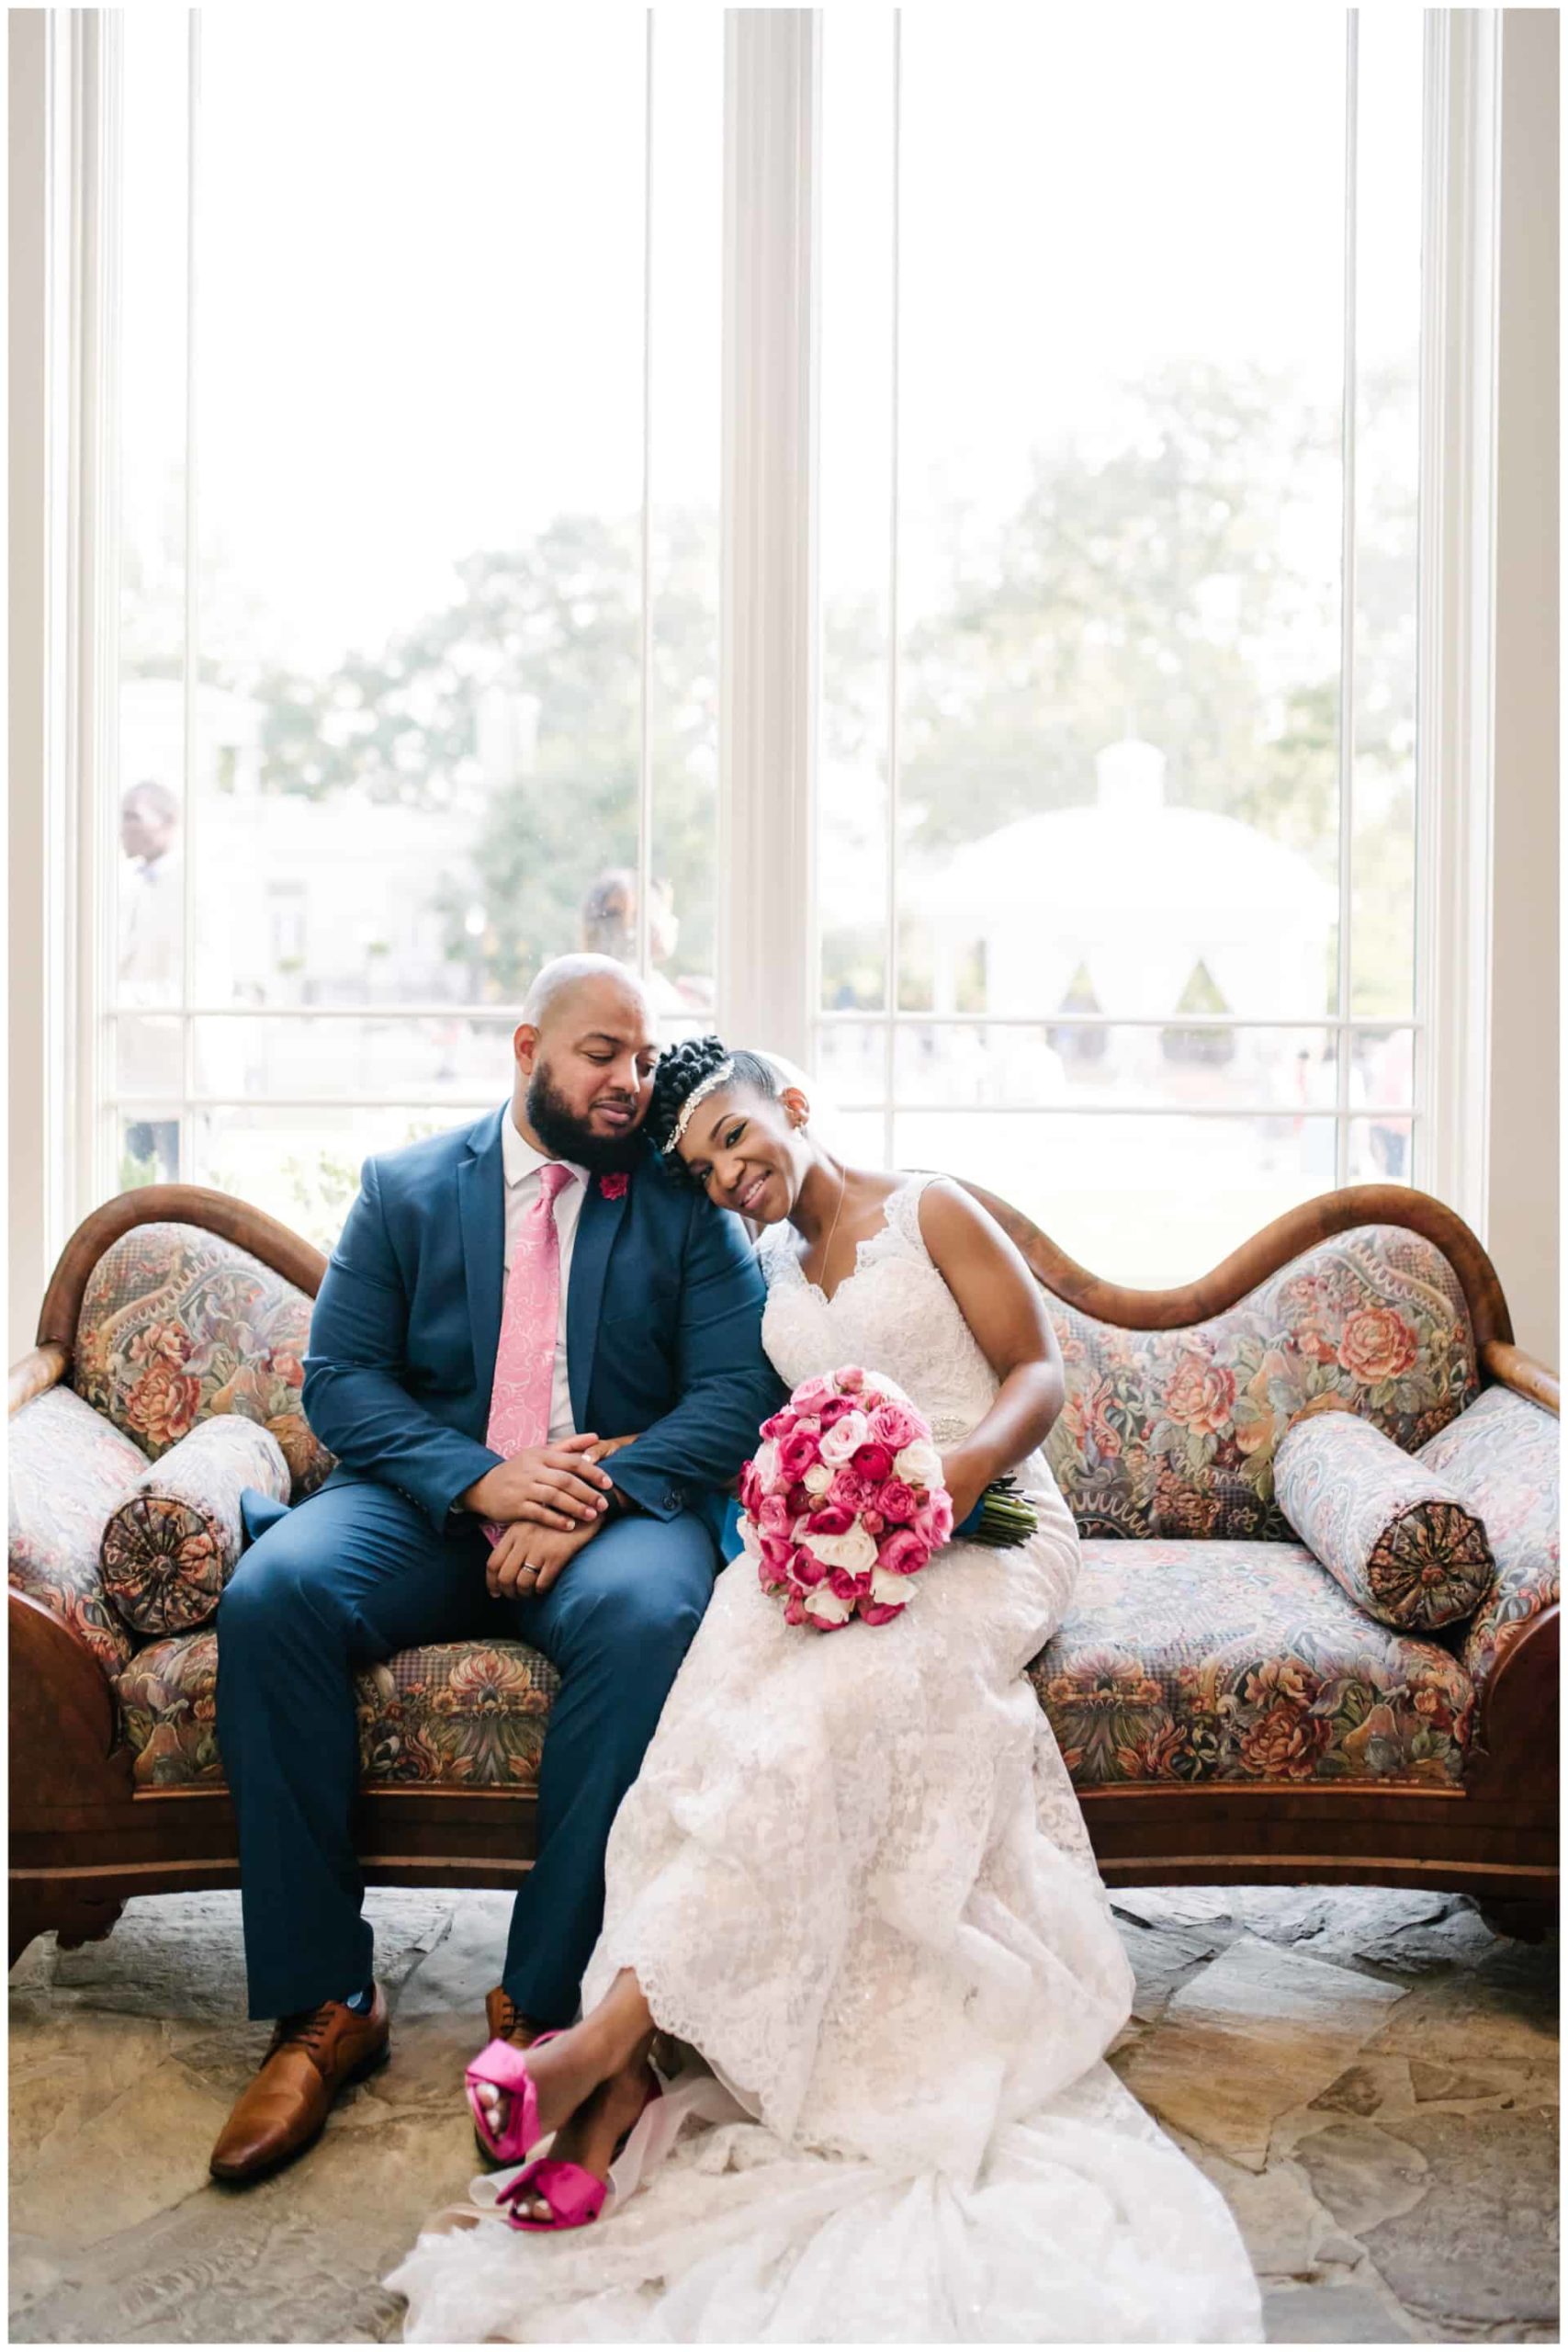 Huntsville Alabama Wedding Photography - African American Wedding - Twenty Oaks Photography - Baron Bluff - Burritt on the Mountain - Bride and Groom sitting on the couch